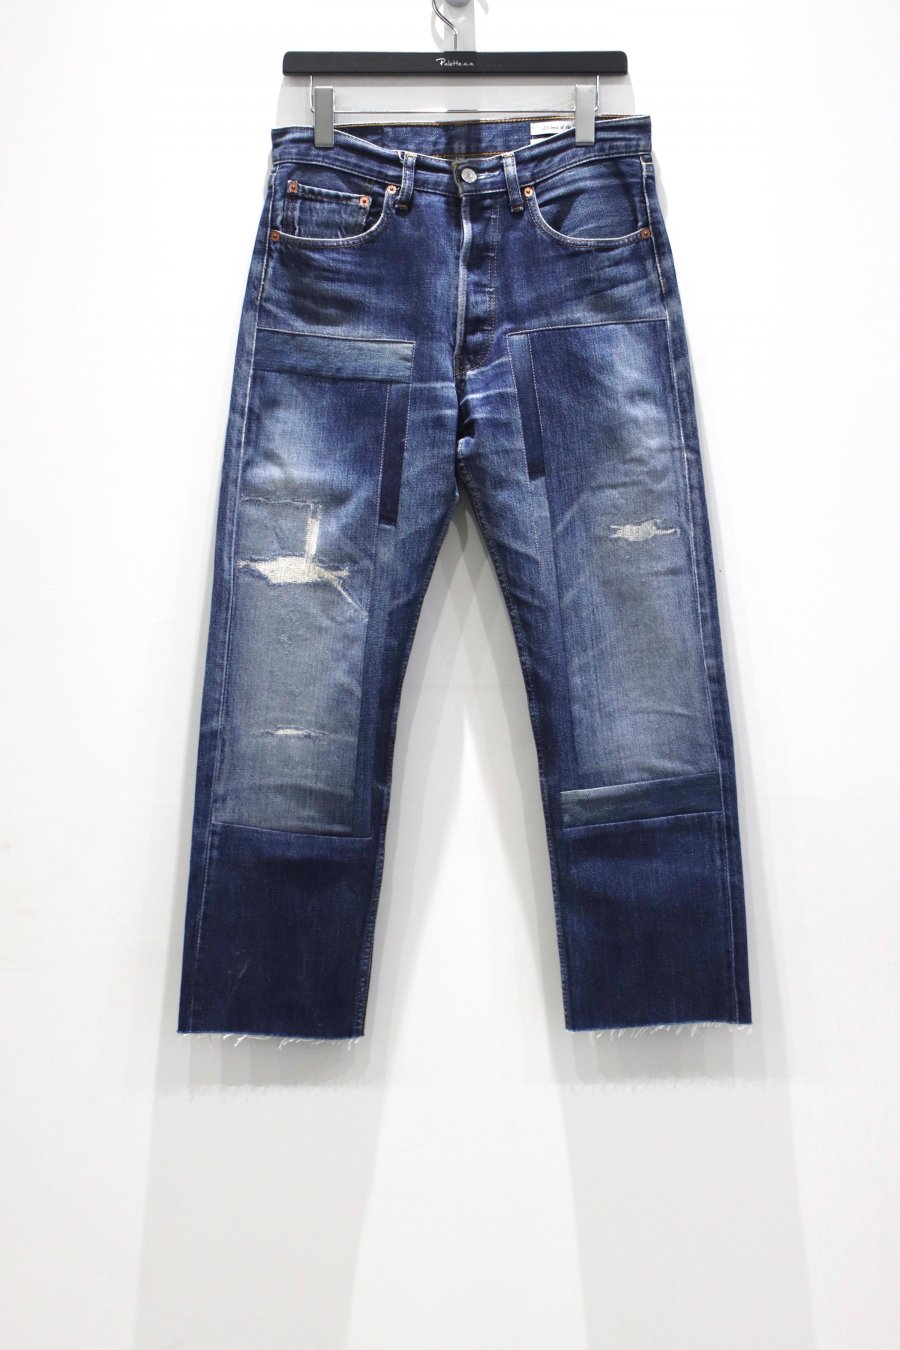 Children of the discordance  NY VINTAGE CUSTOMMADE PATCH DENIM B<img class='new_mark_img2' src='https://img.shop-pro.jp/img/new/icons15.gif' style='border:none;display:inline;margin:0px;padding:0px;width:auto;' />